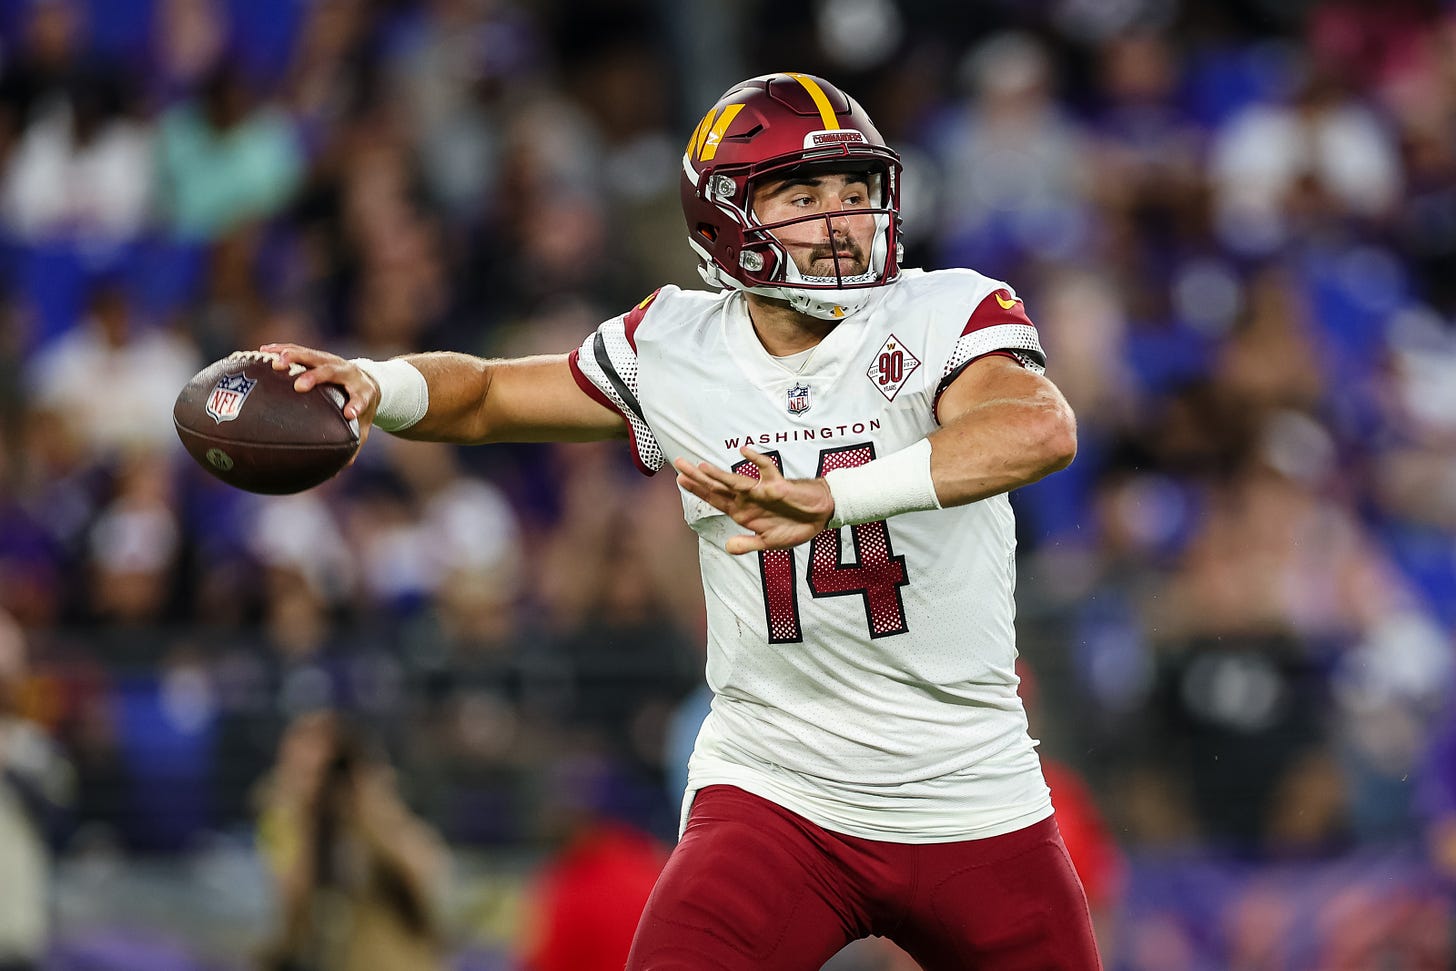 NFL scouts imply Commanders got huge steal with QB Sam Howell